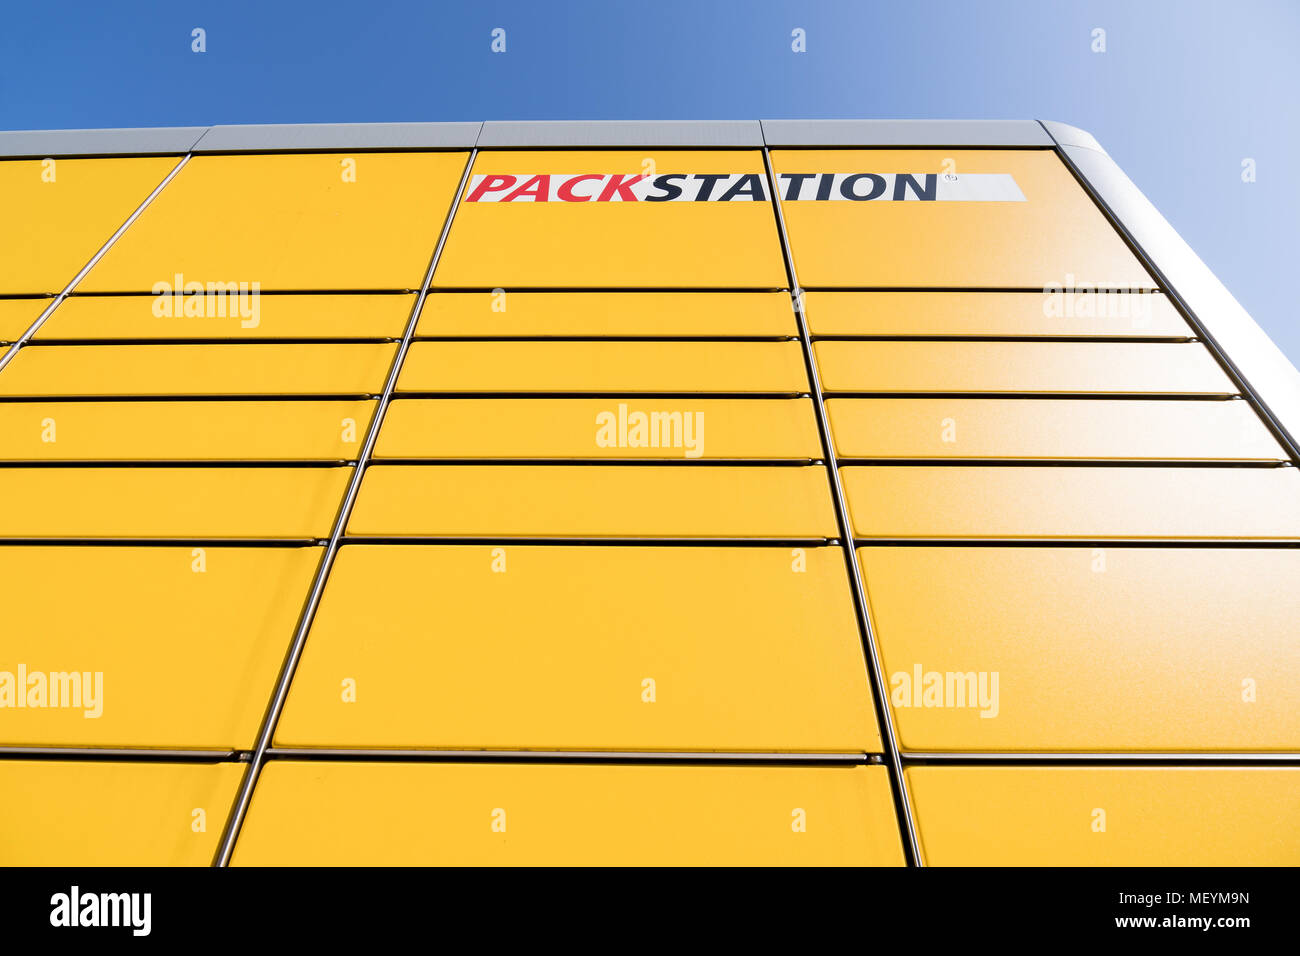 DHL Packstation (Parcelstation), providing automated booths for self-service collection as well as self-service dispatch of parcels 24 hours a day. Stock Photo